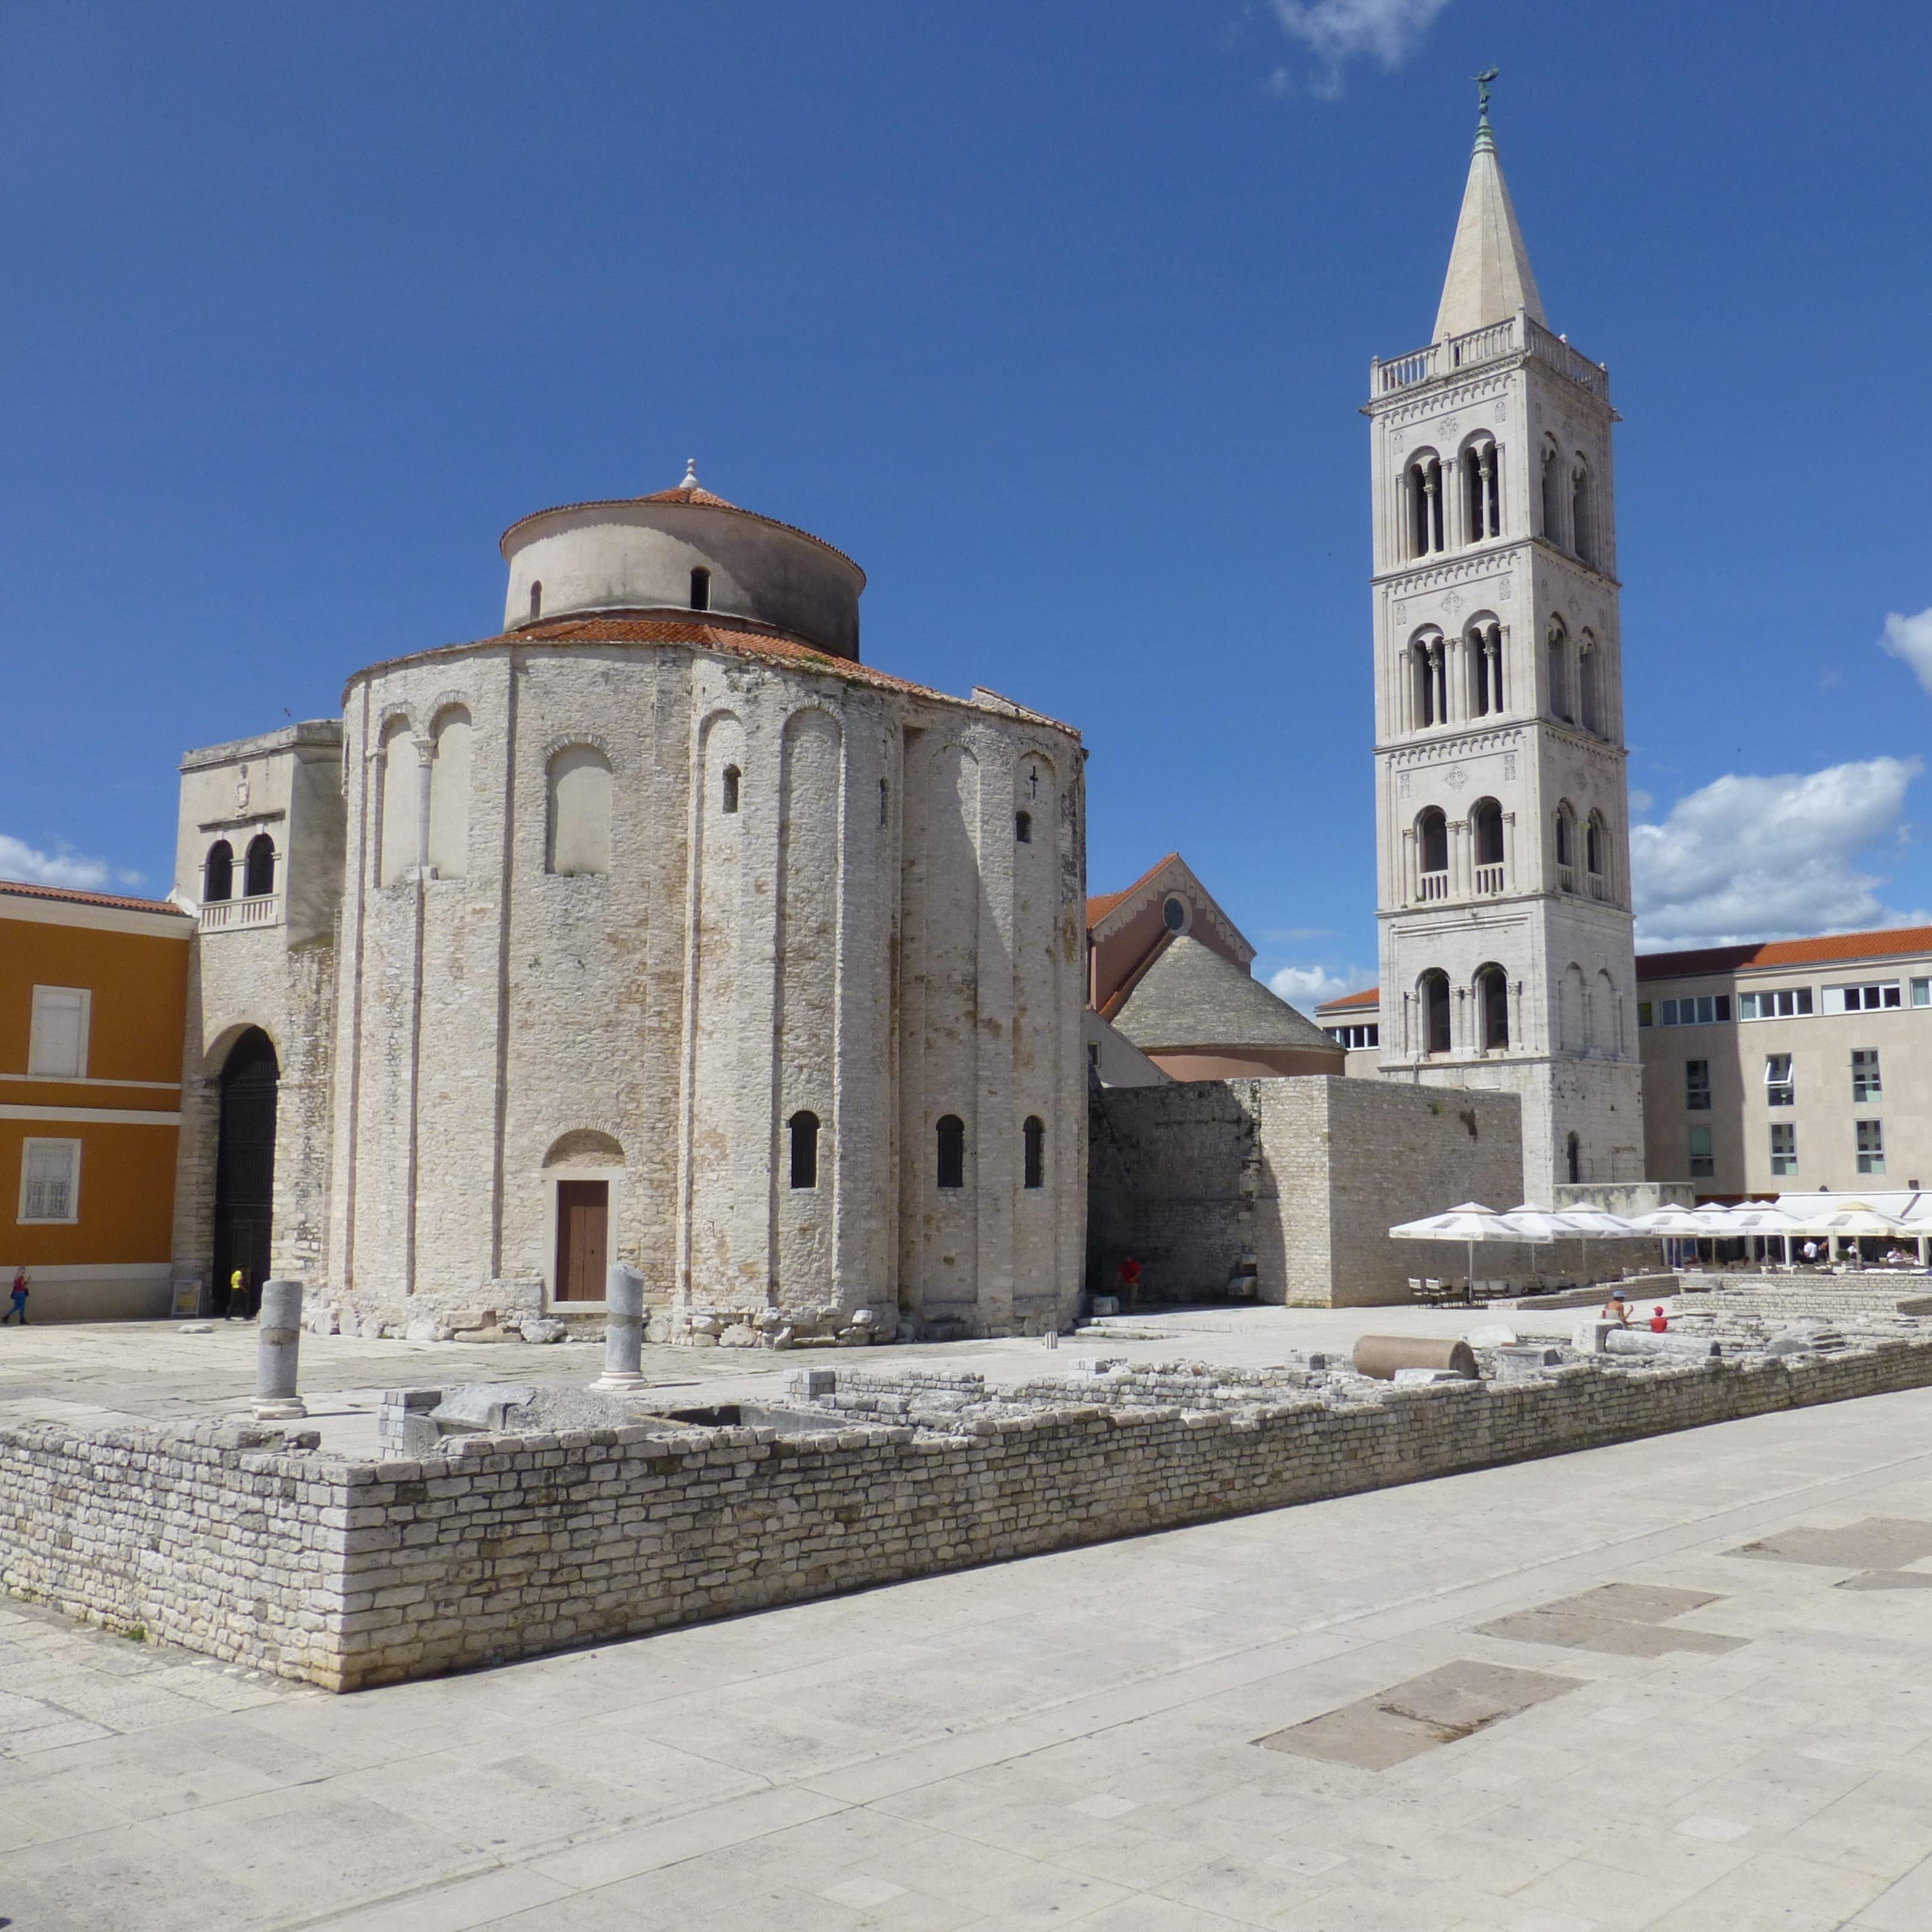 Zadar is a favourite holiday destination for history buffs